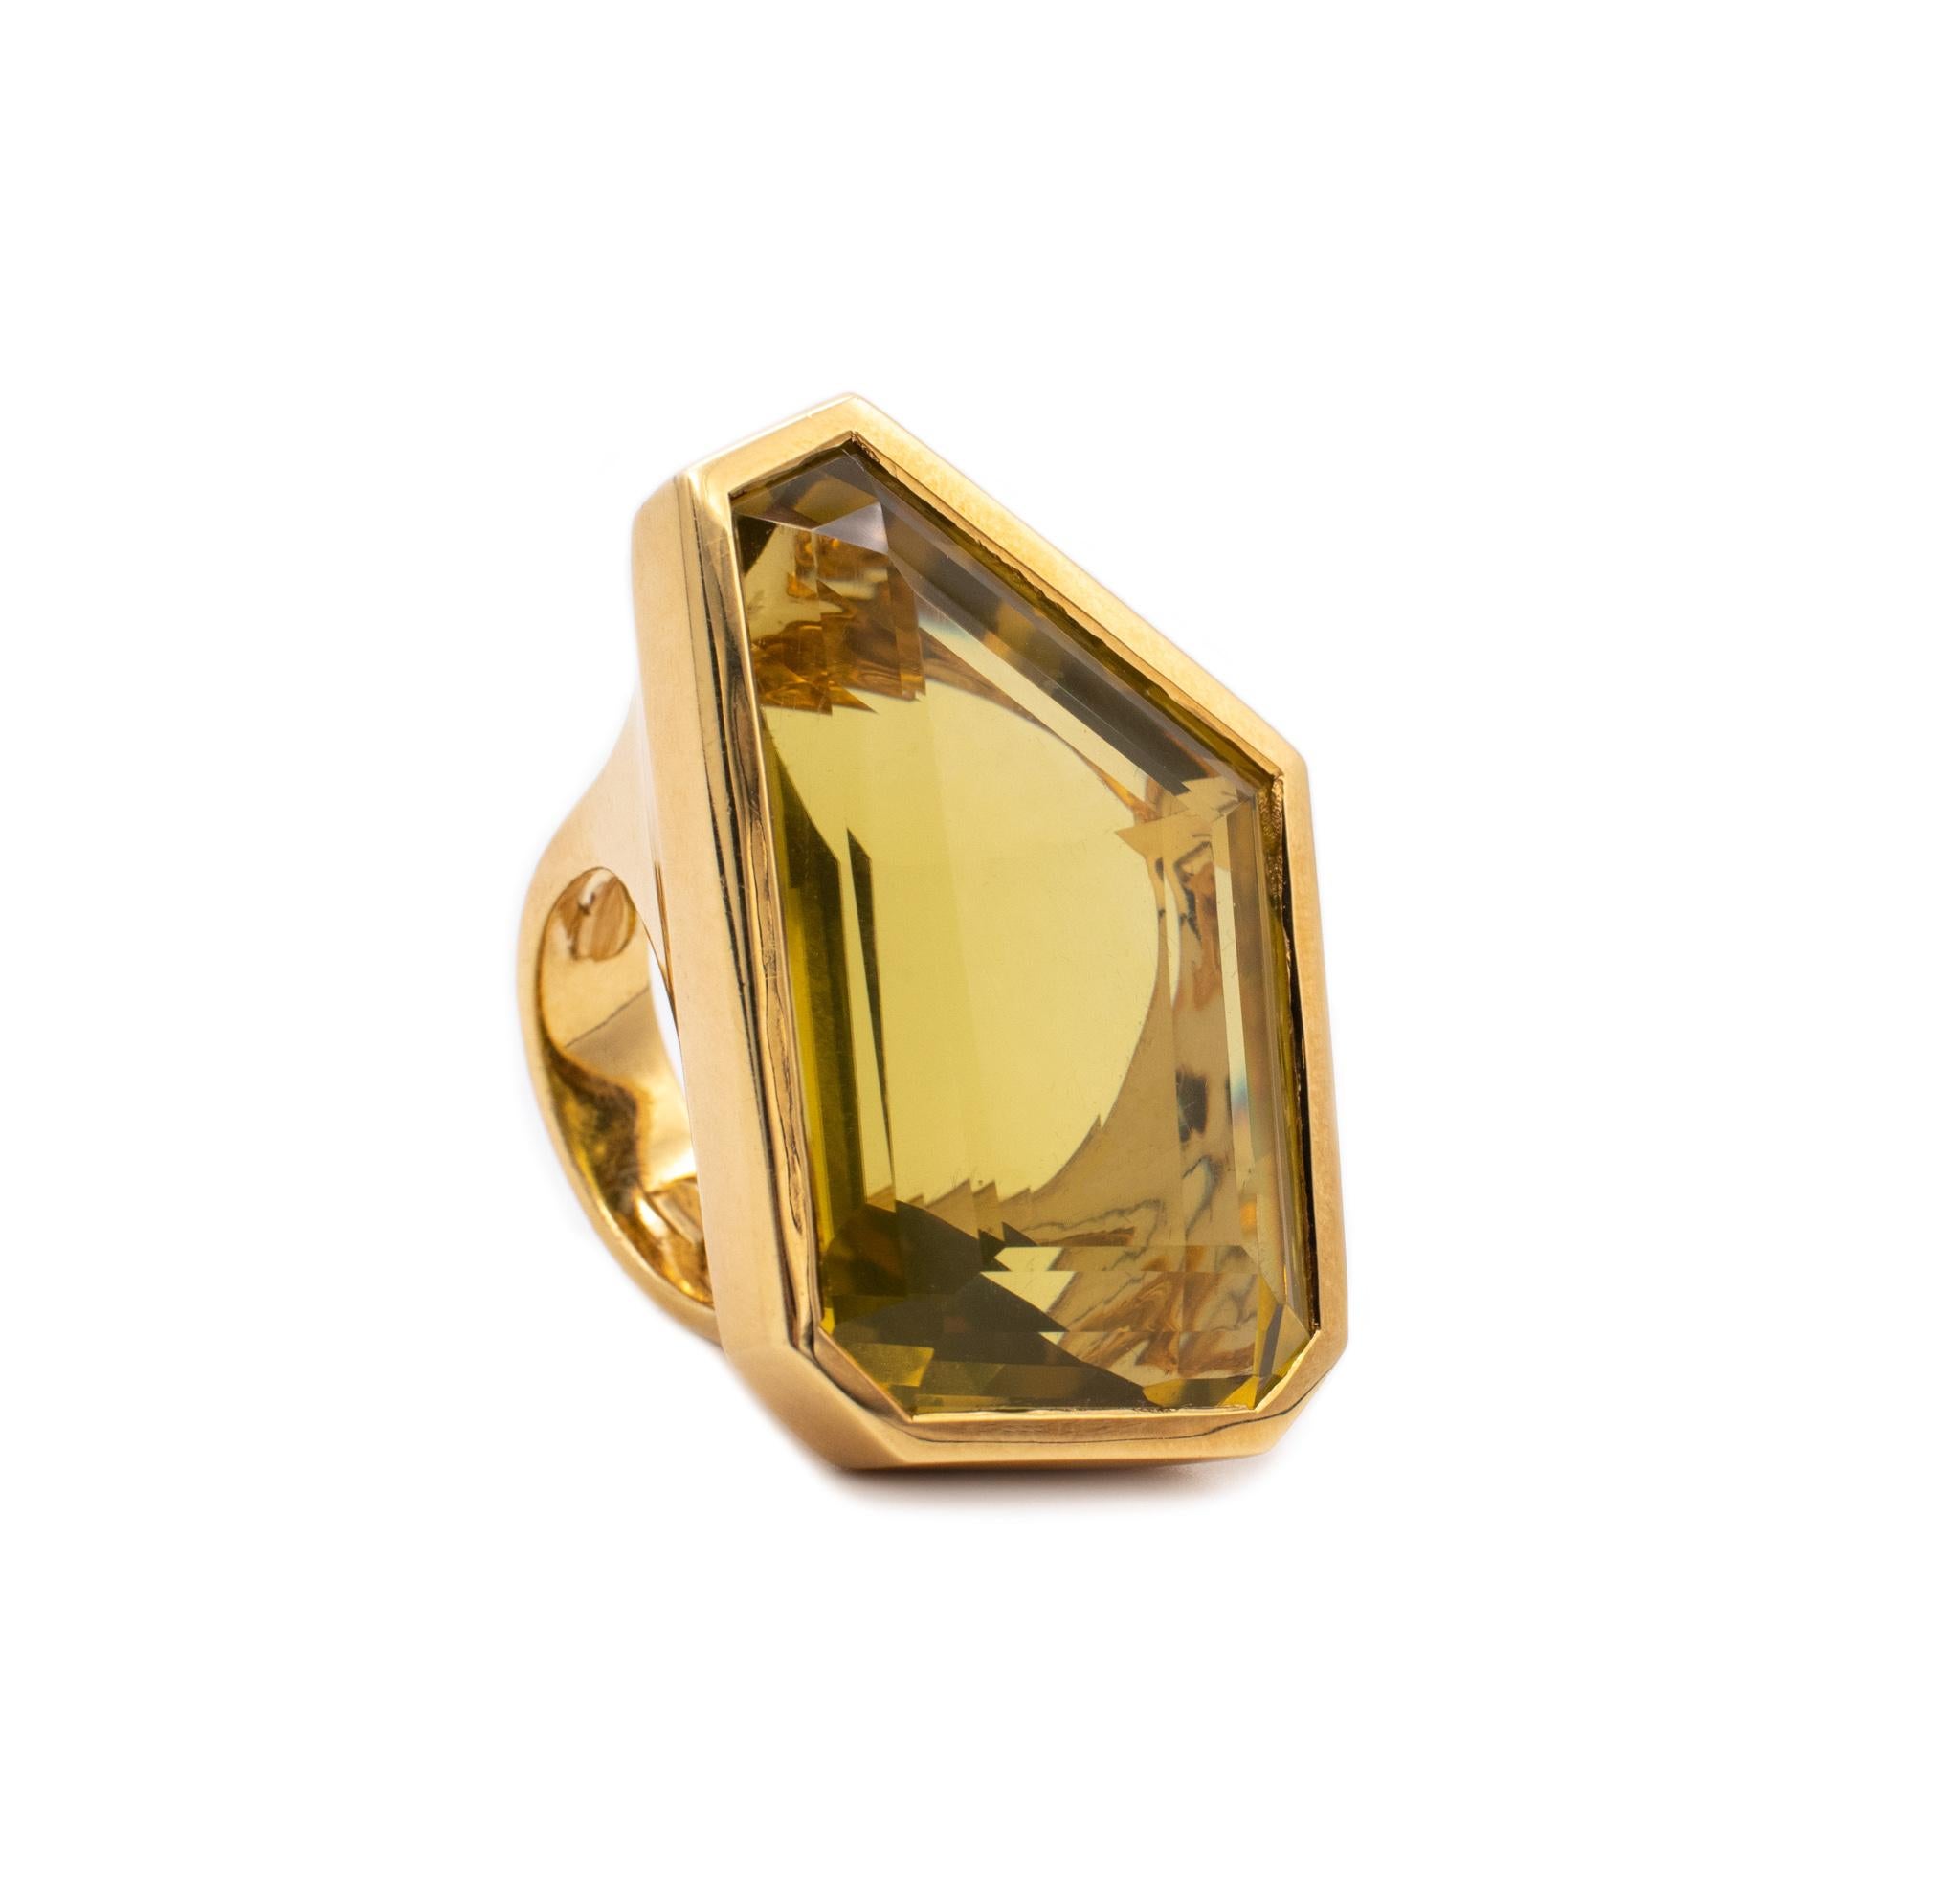 Bold geometric ring designed by Tony Duquette (1914-1999).

A rare and gorgeous vintage piece, created by the American designer Tony Duquette, back in the 1980's. This cocktail ring was carefully crafted, with geometric semi-curved seven sides in